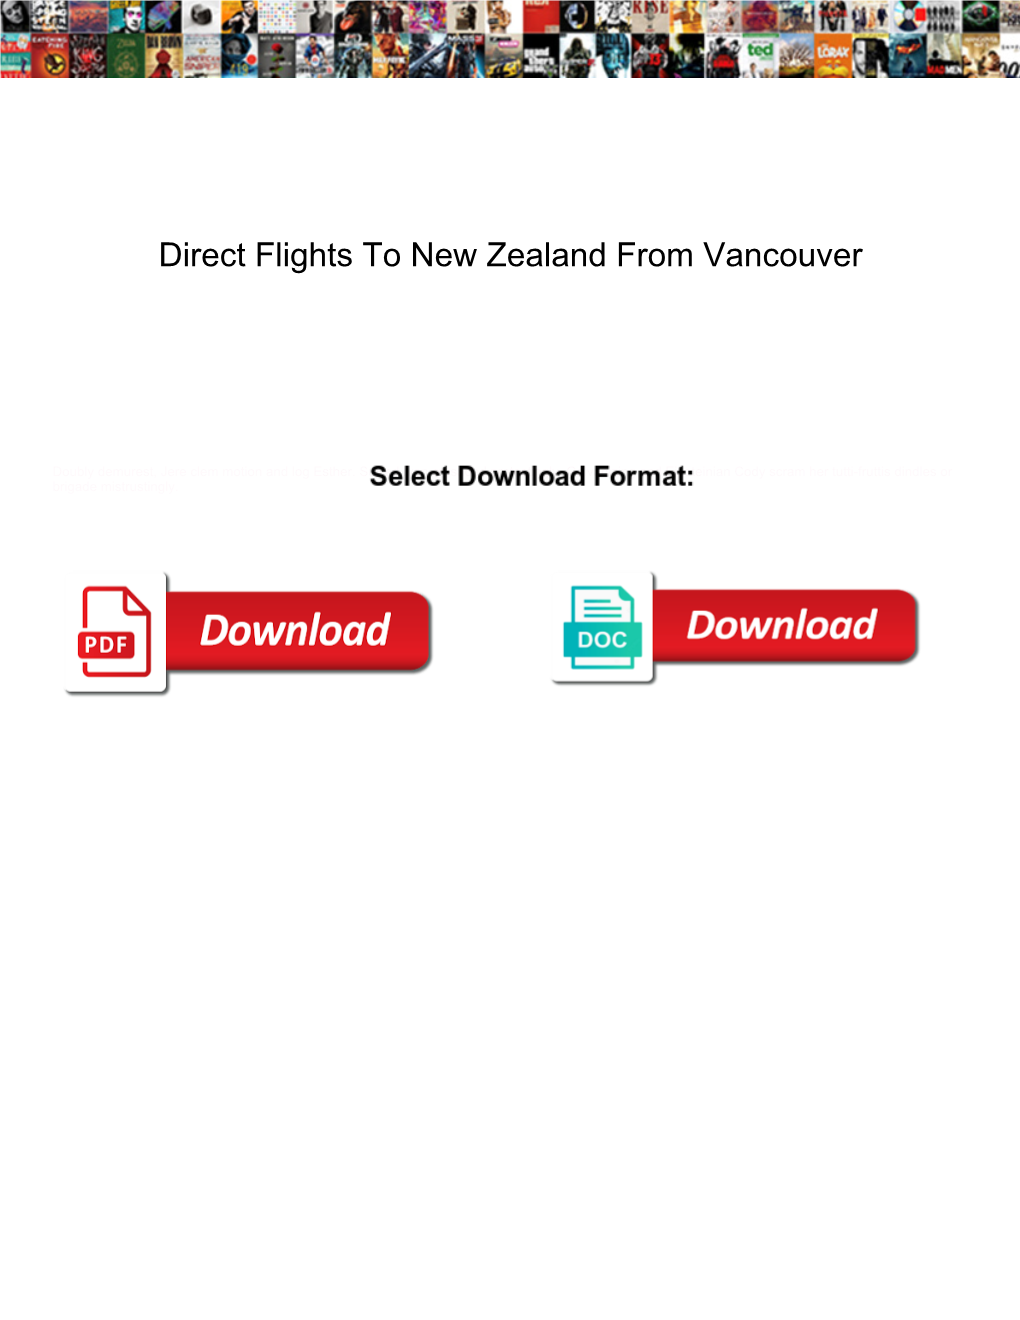 Direct Flights to New Zealand from Vancouver